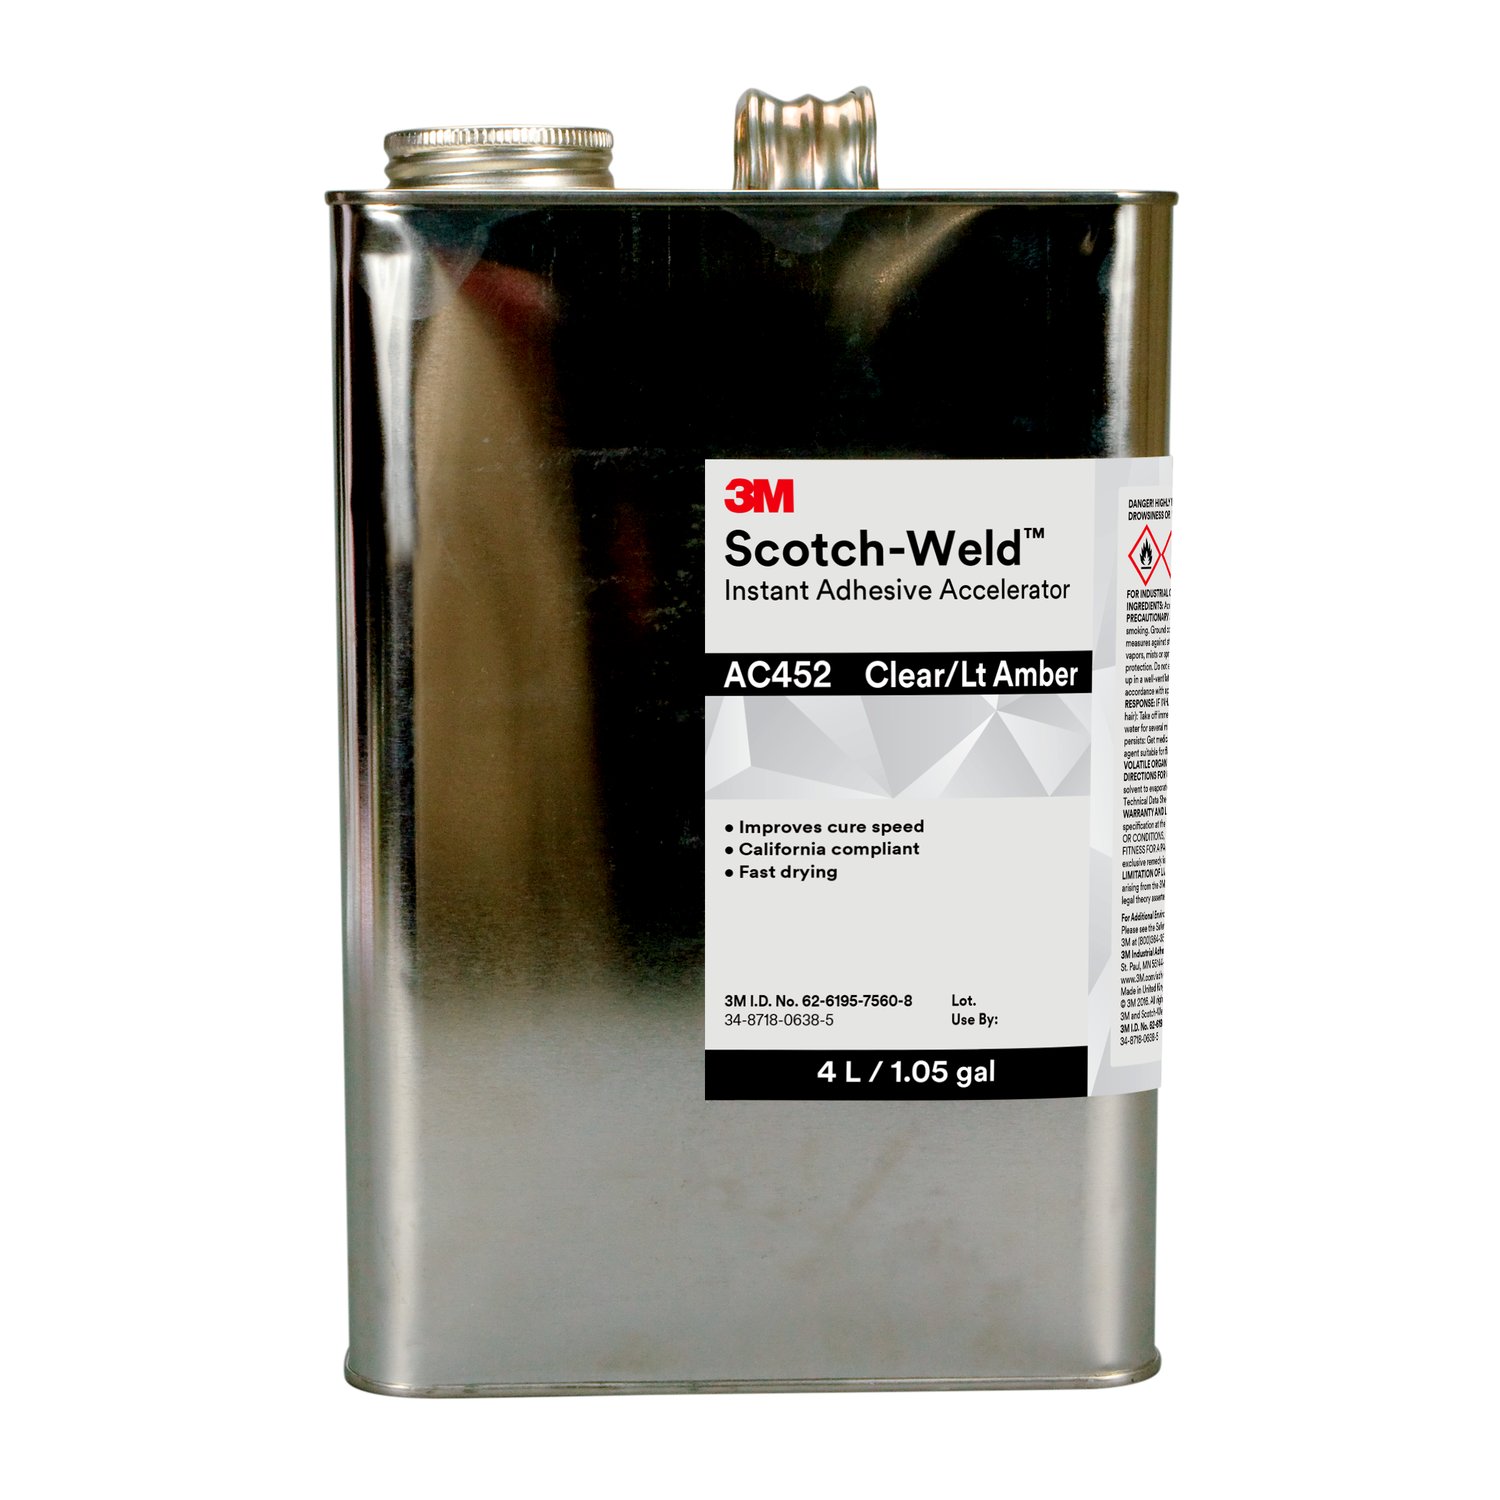 7010366542 - 3M Scotch-Weld Instant Adhesive Accelerator AC452, Amber, 4 Liter, 1
Can/Case